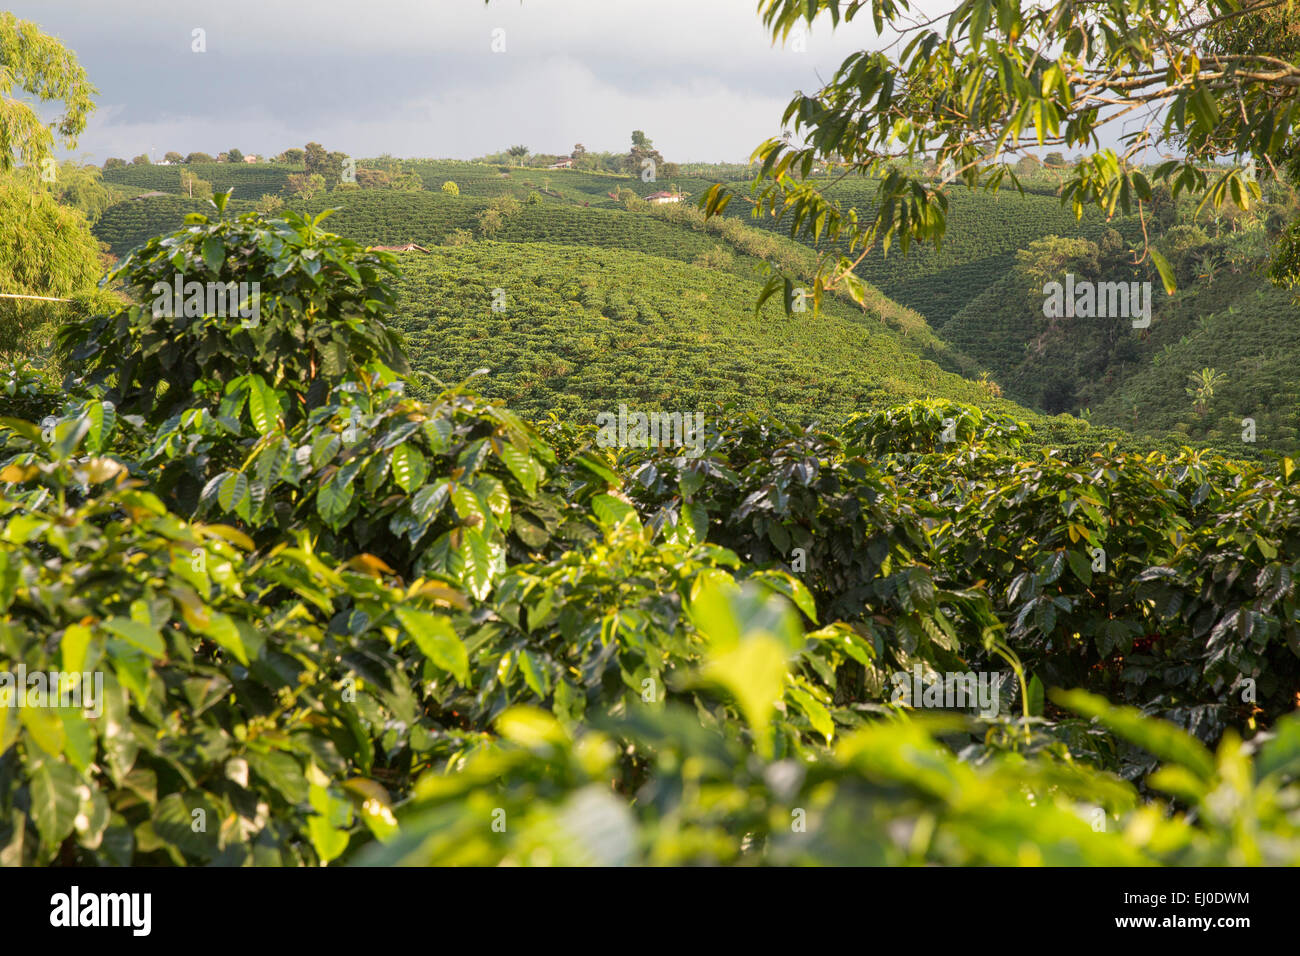 South America, Latin America, Colombia, coffee production, coffee, agriculture, green, Pereira Stock Photo